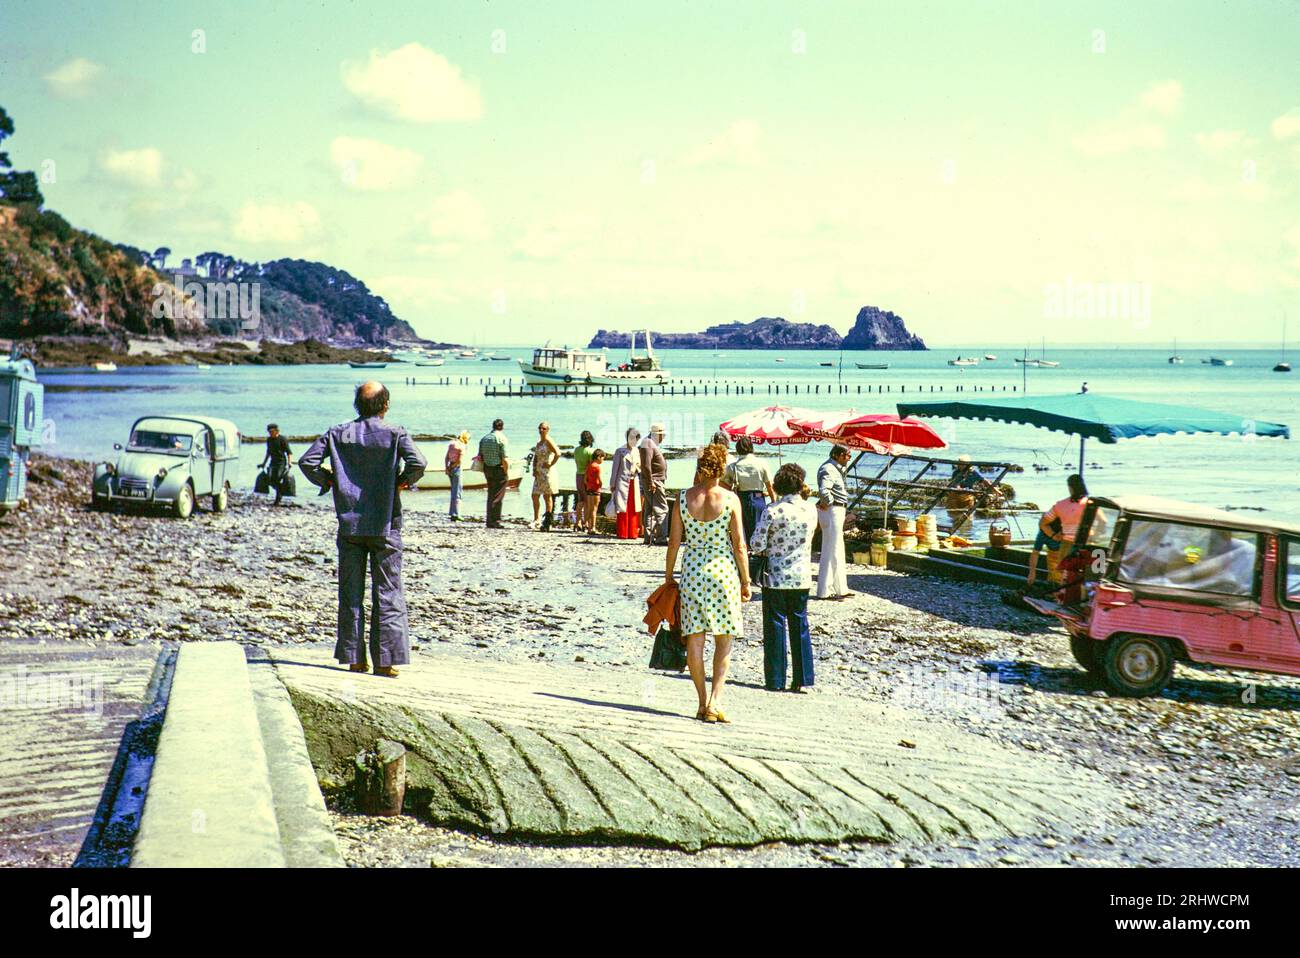 Oyster sellers market at Cancale commune in the Ille-et-Vilaine department, Brittany, northwestern France, 1975 Stock Photo